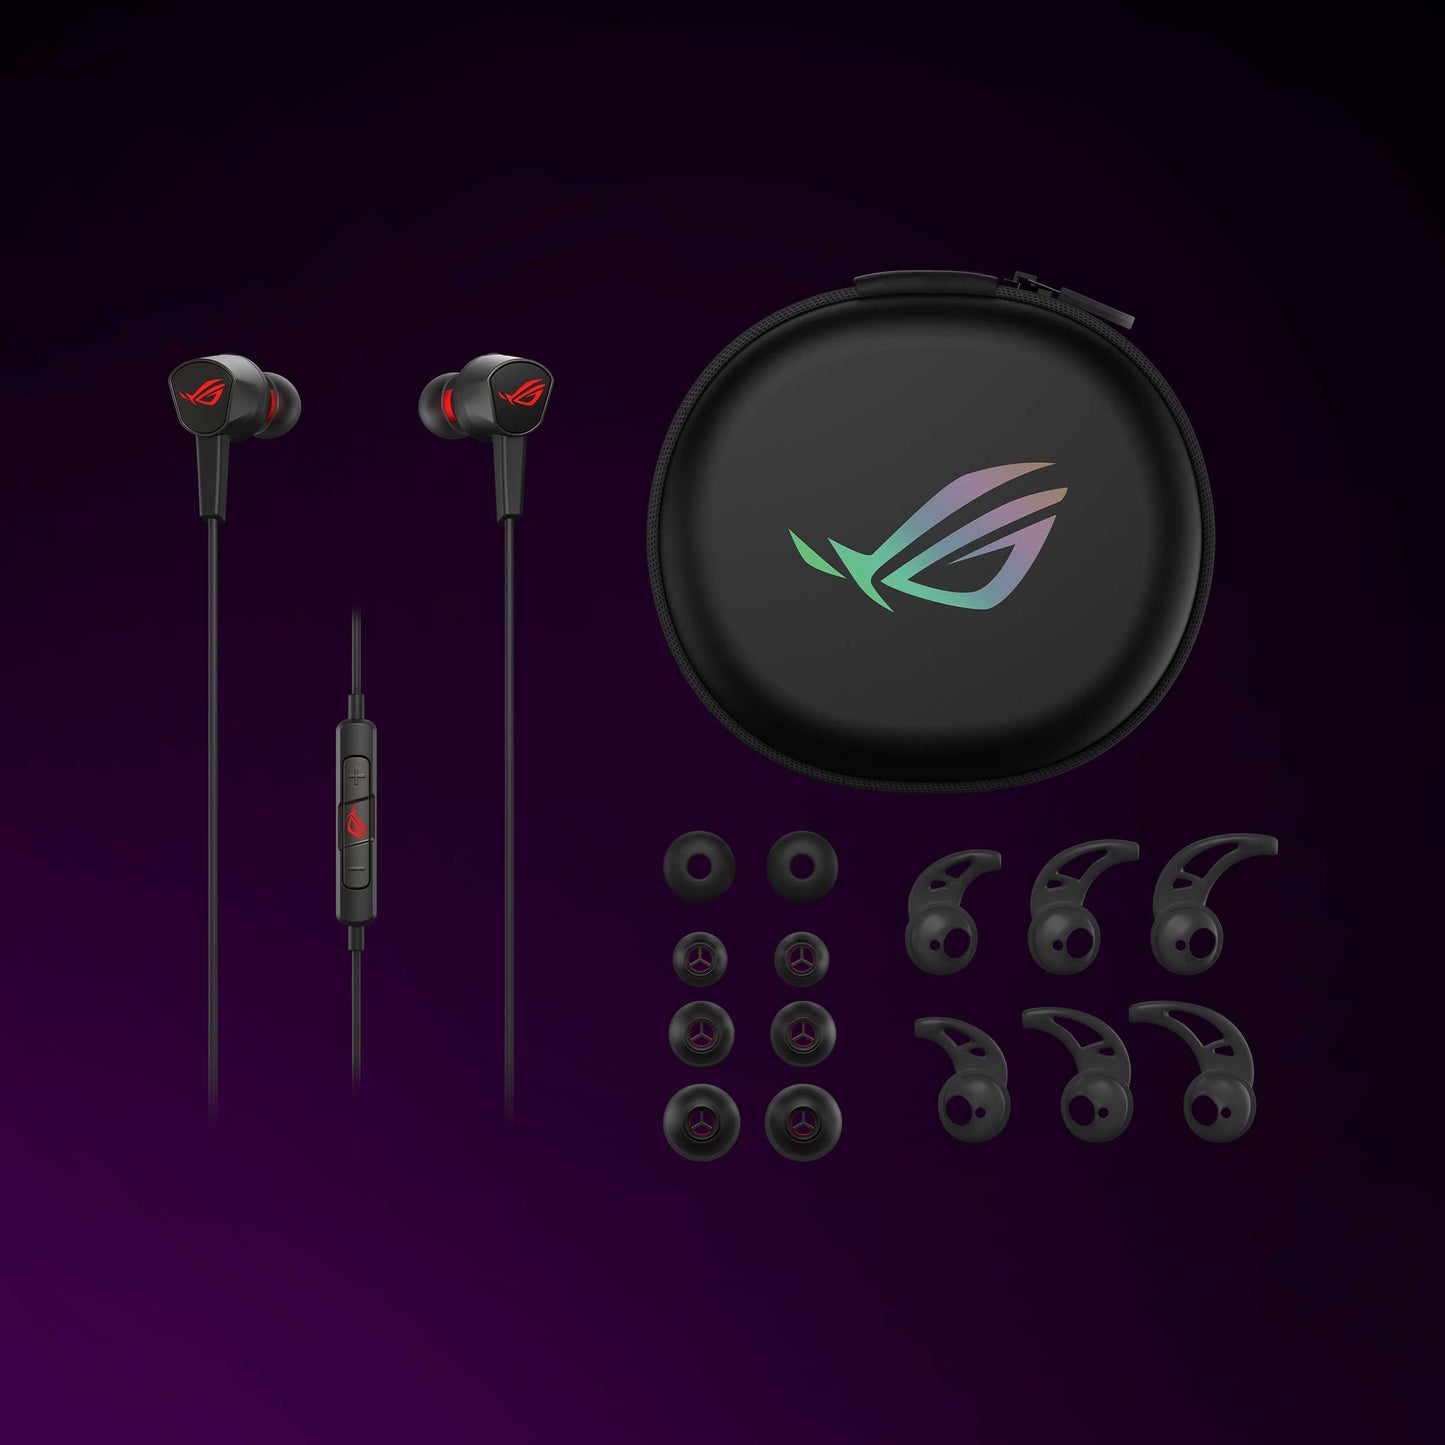 ASUS ROG Cetra II Core in-ear gaming headphones with liquid silicone rubber drivers, 3.5mm connector [For PC, Phone, Console]